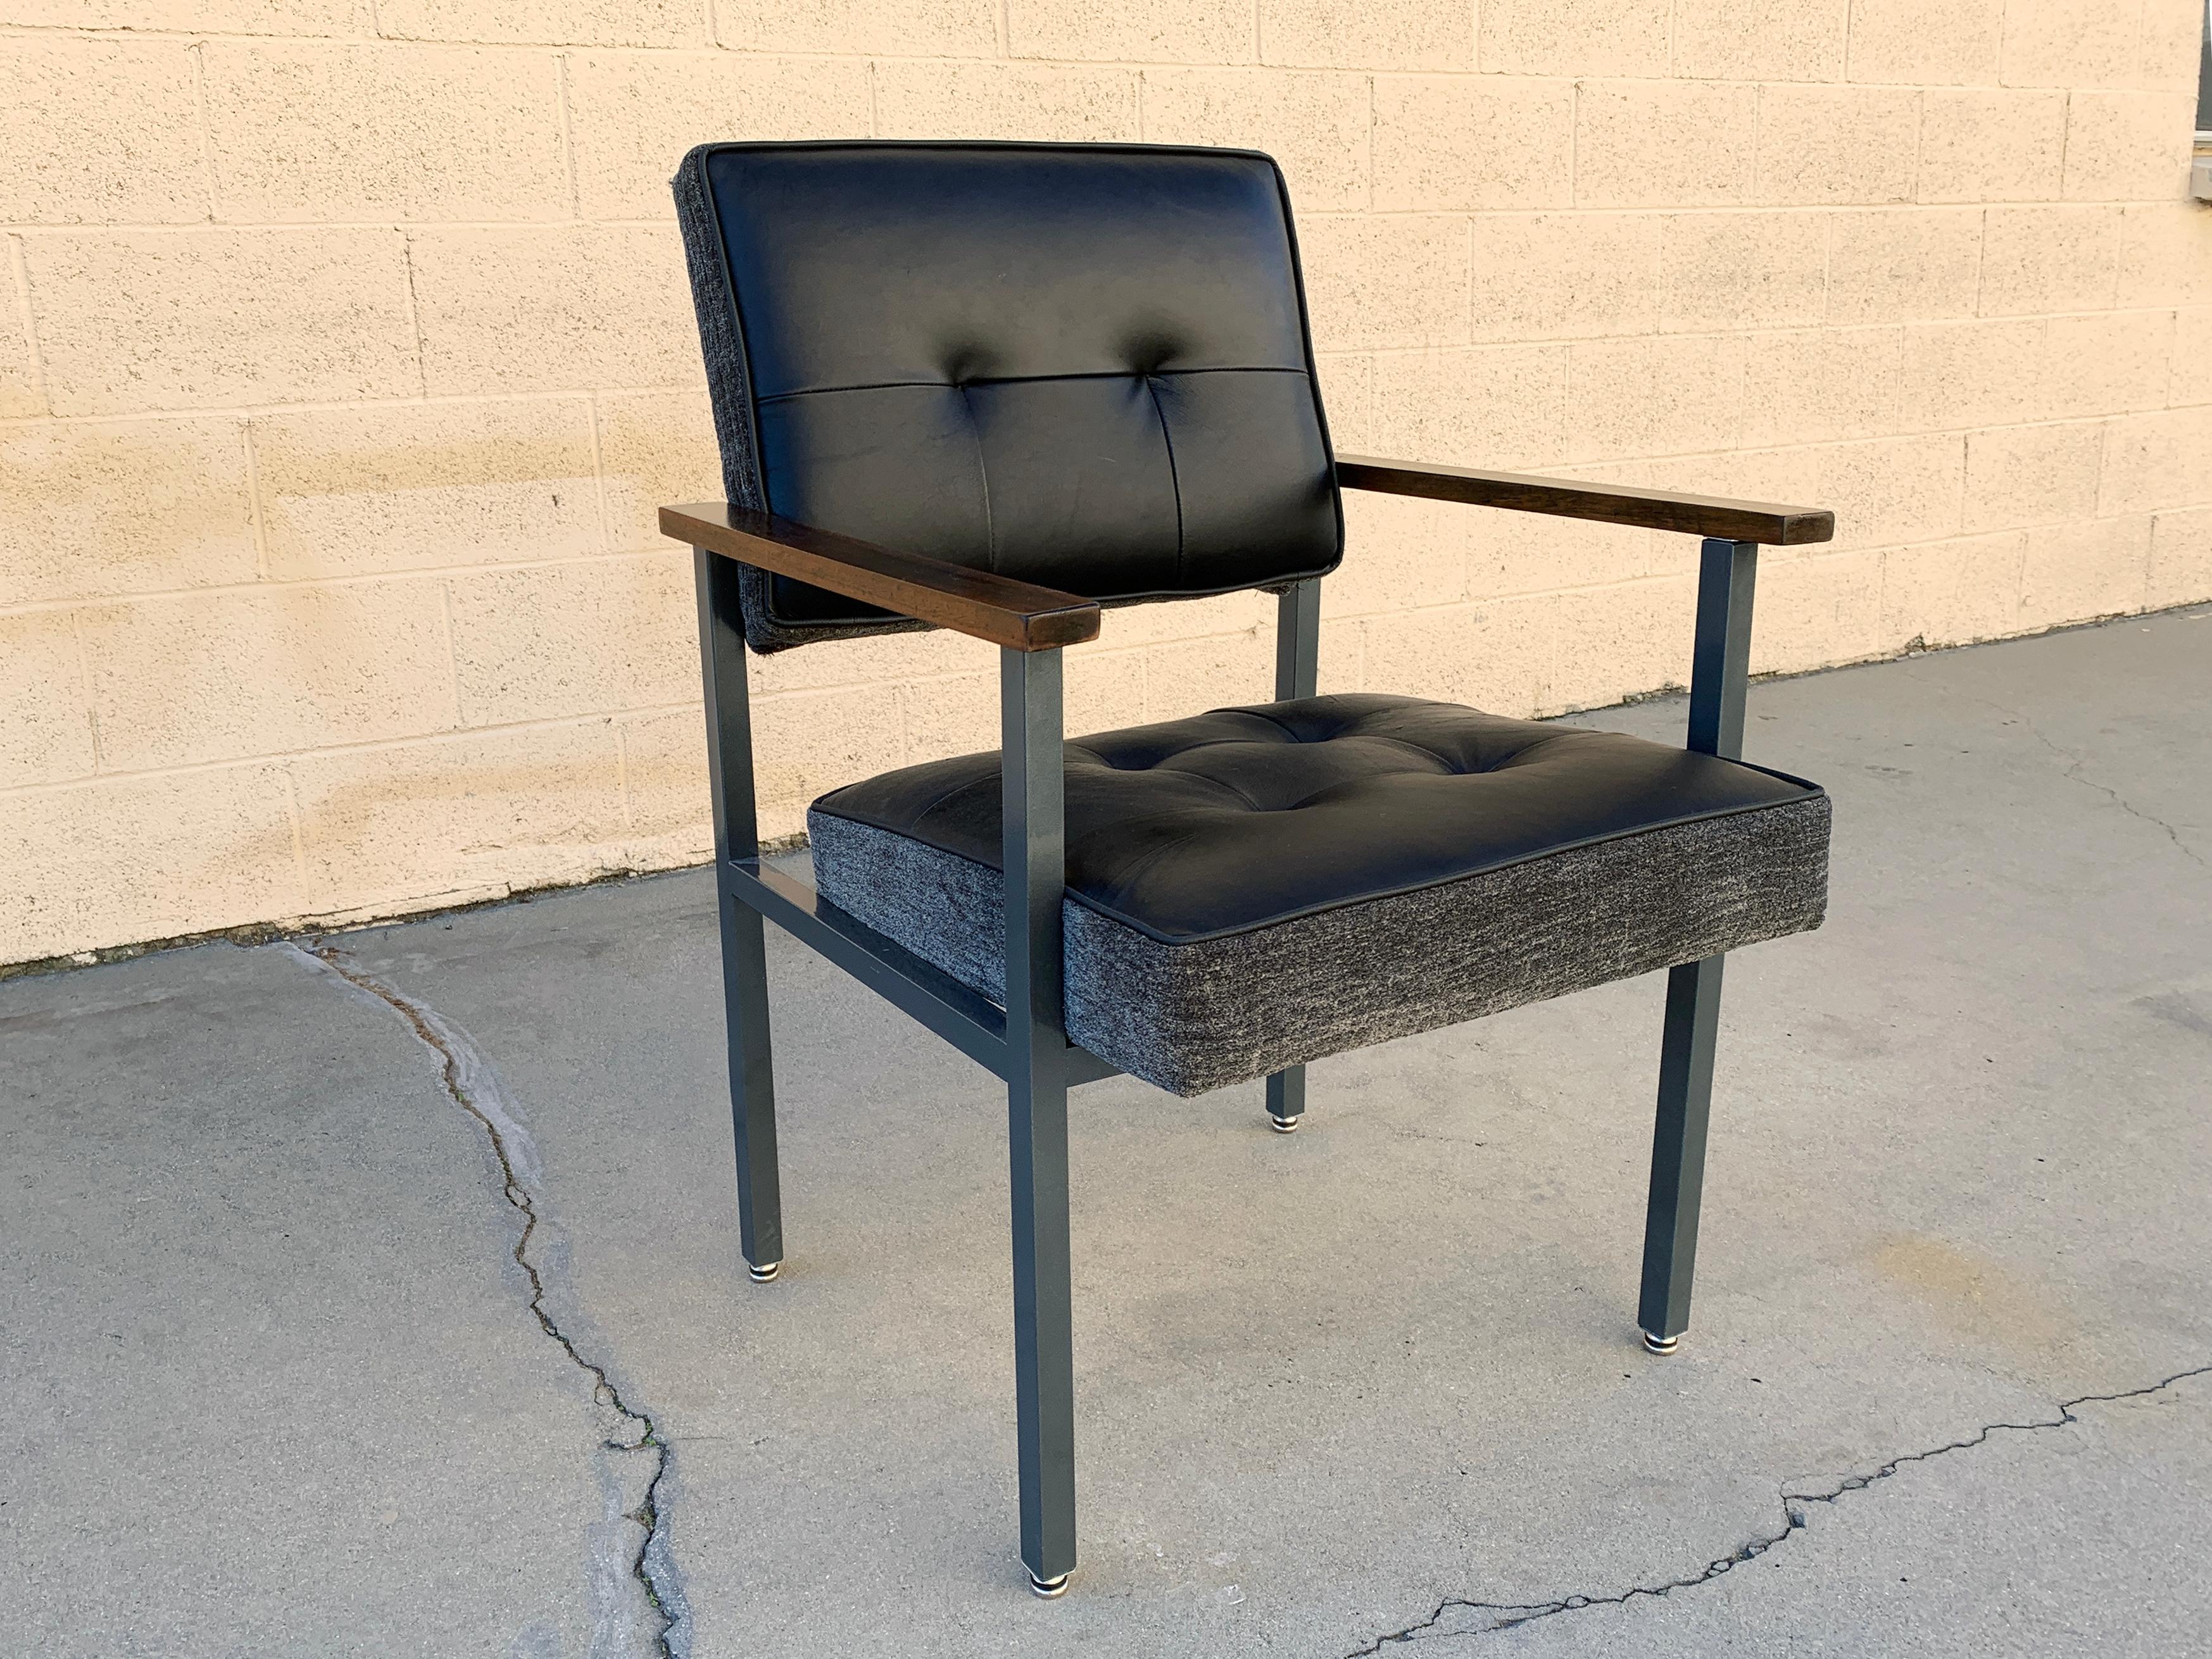 Sleek 1970s armchair in the style of Knoll or General Fireproofing Co. Composed of a steel frame refinished in Metallic Gray (GR02), and new upholstery in two-tone black leather and heather grey chenille. Reconditioned walnut armcaps. In excellent